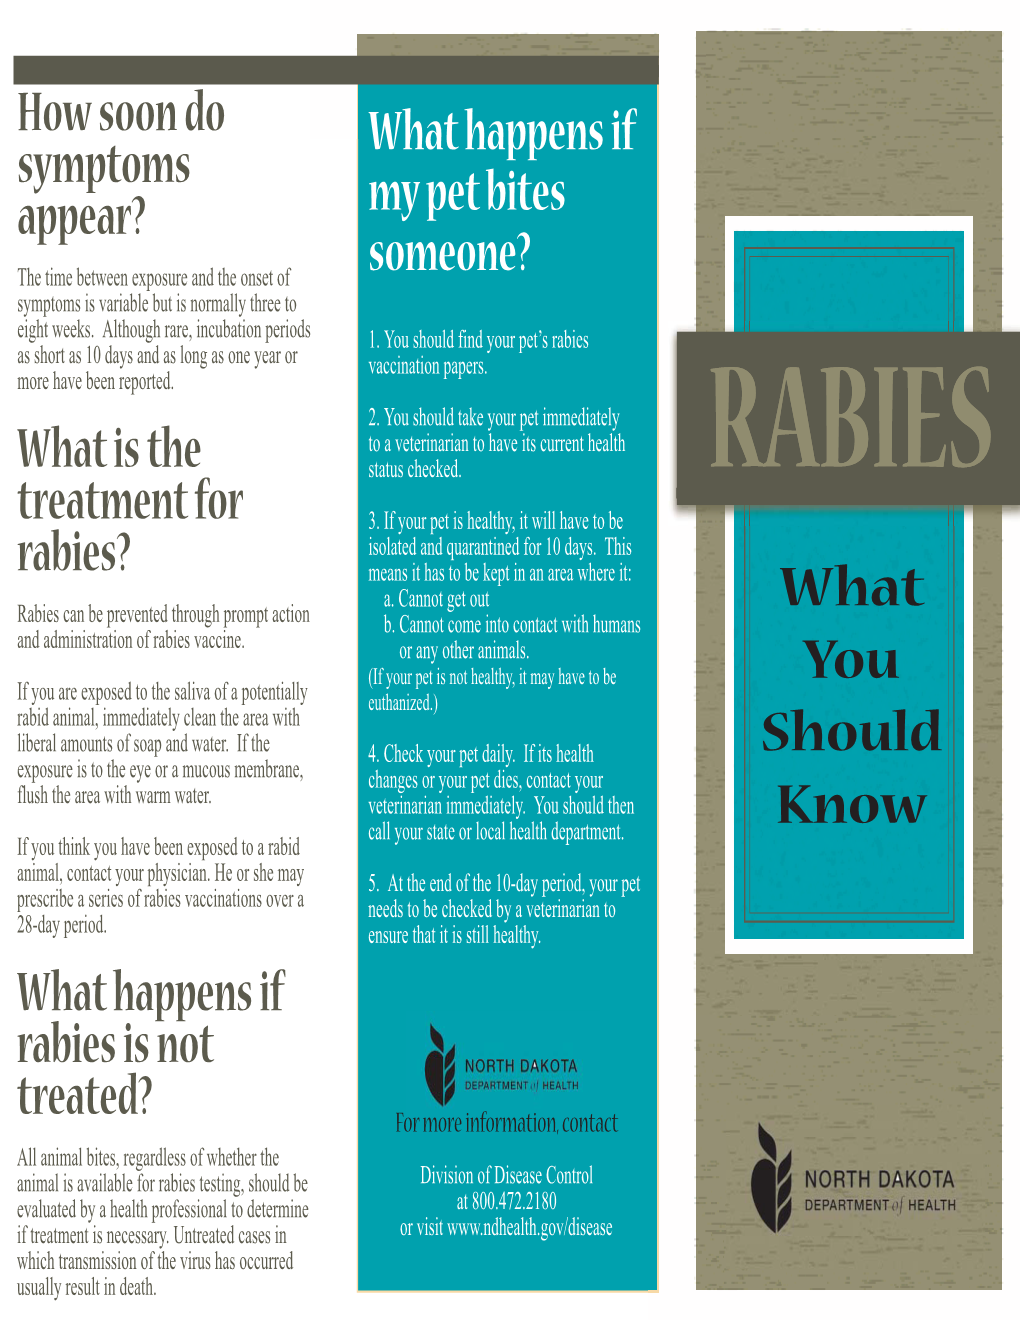 How Soon Do Symptoms Appear? What Is the Treatment for Rabies?